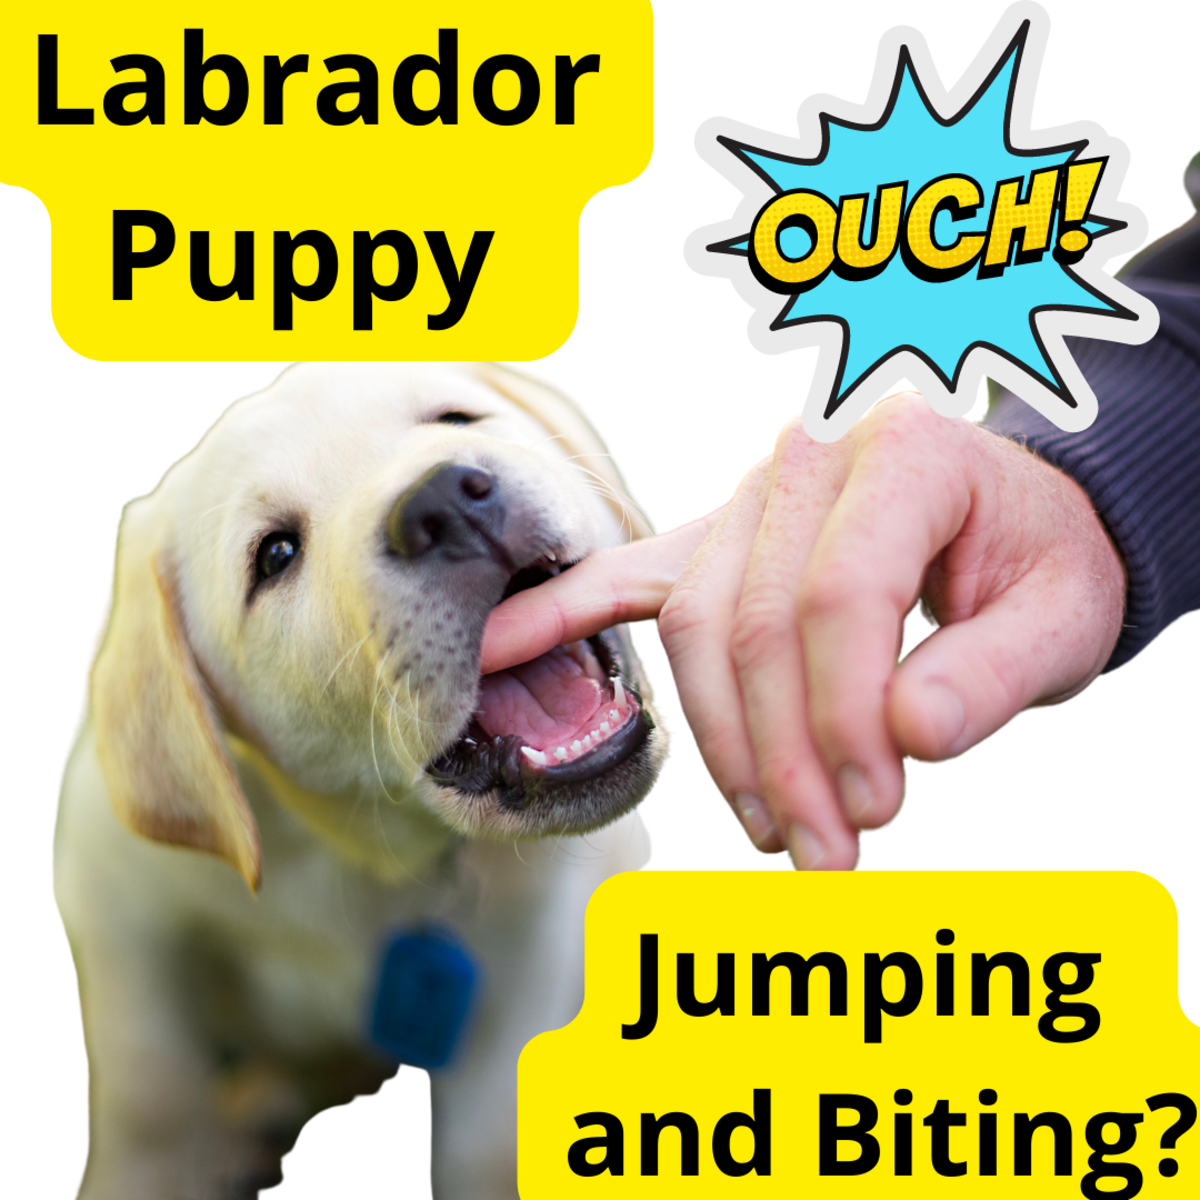 Is your Labrador jumping and biting?